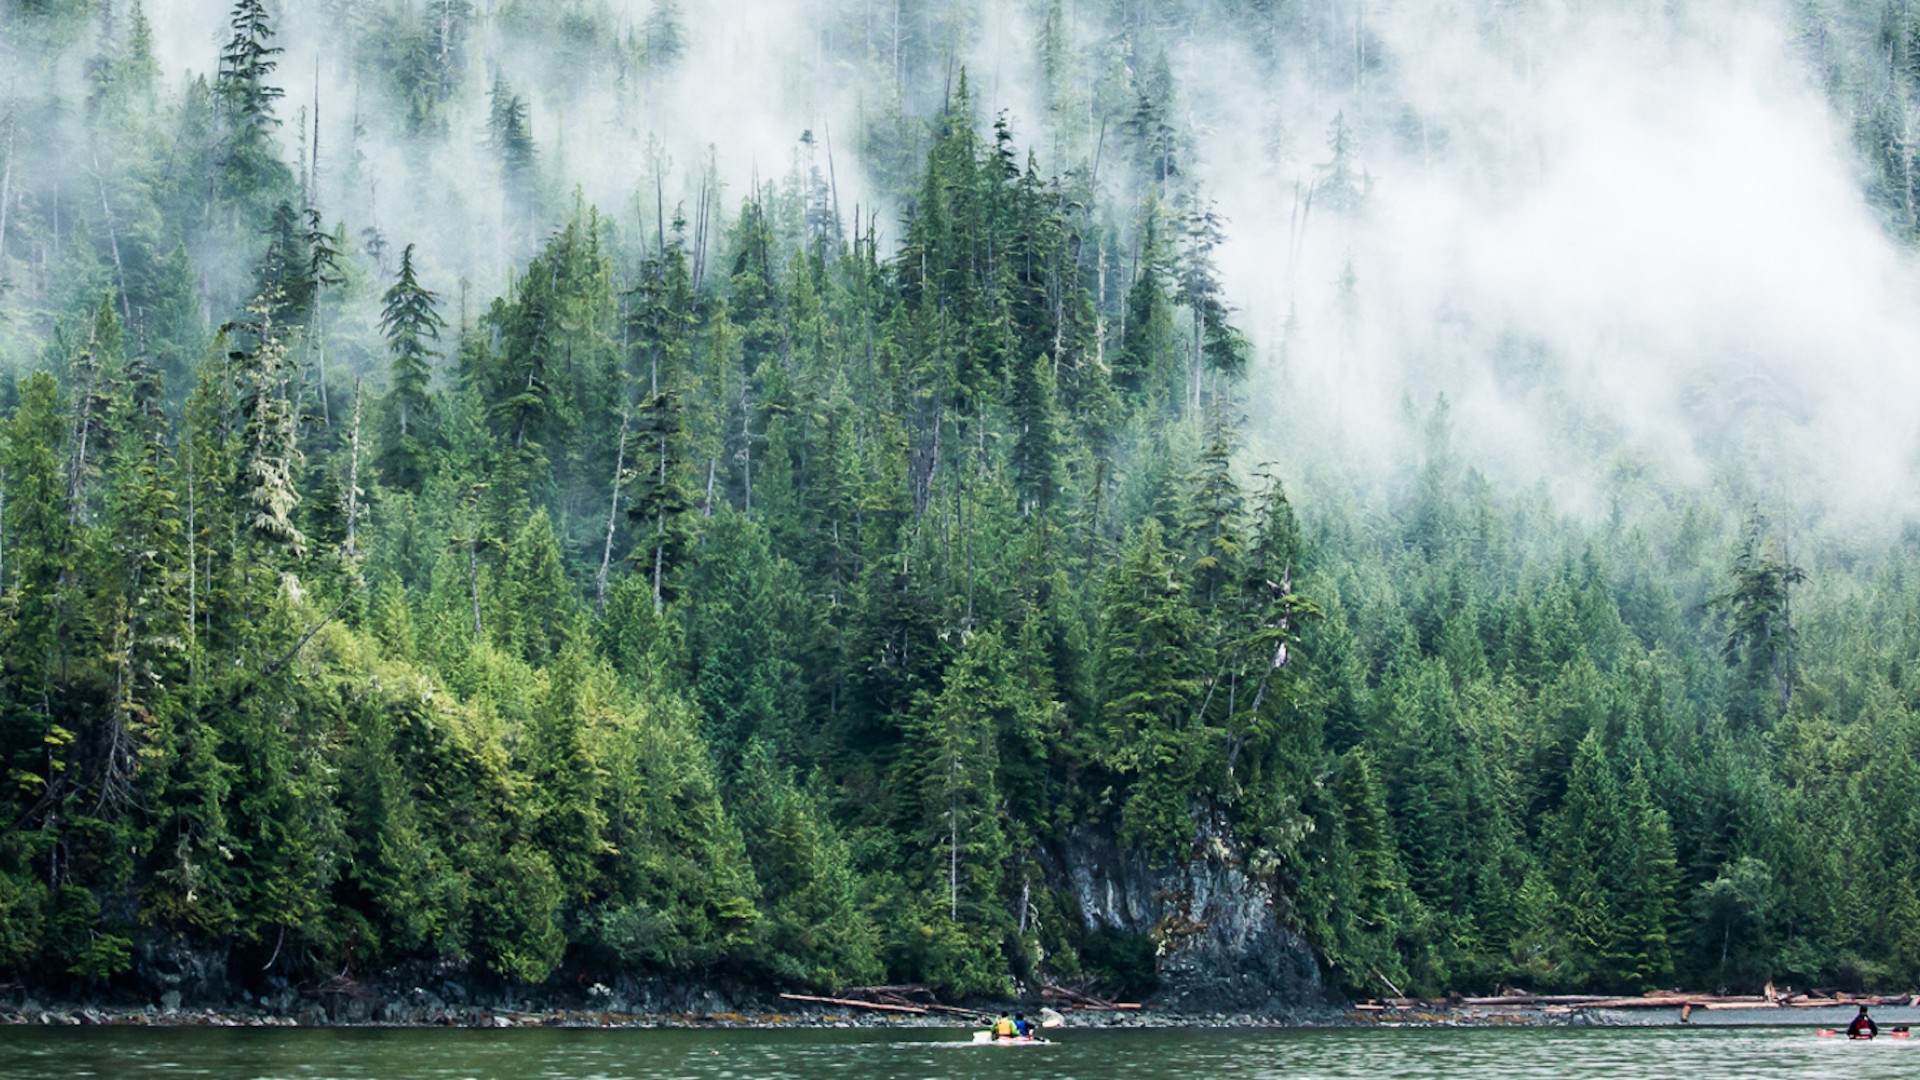 Misty rain and fog moving through a dense forest of trees along coastal British Columbia